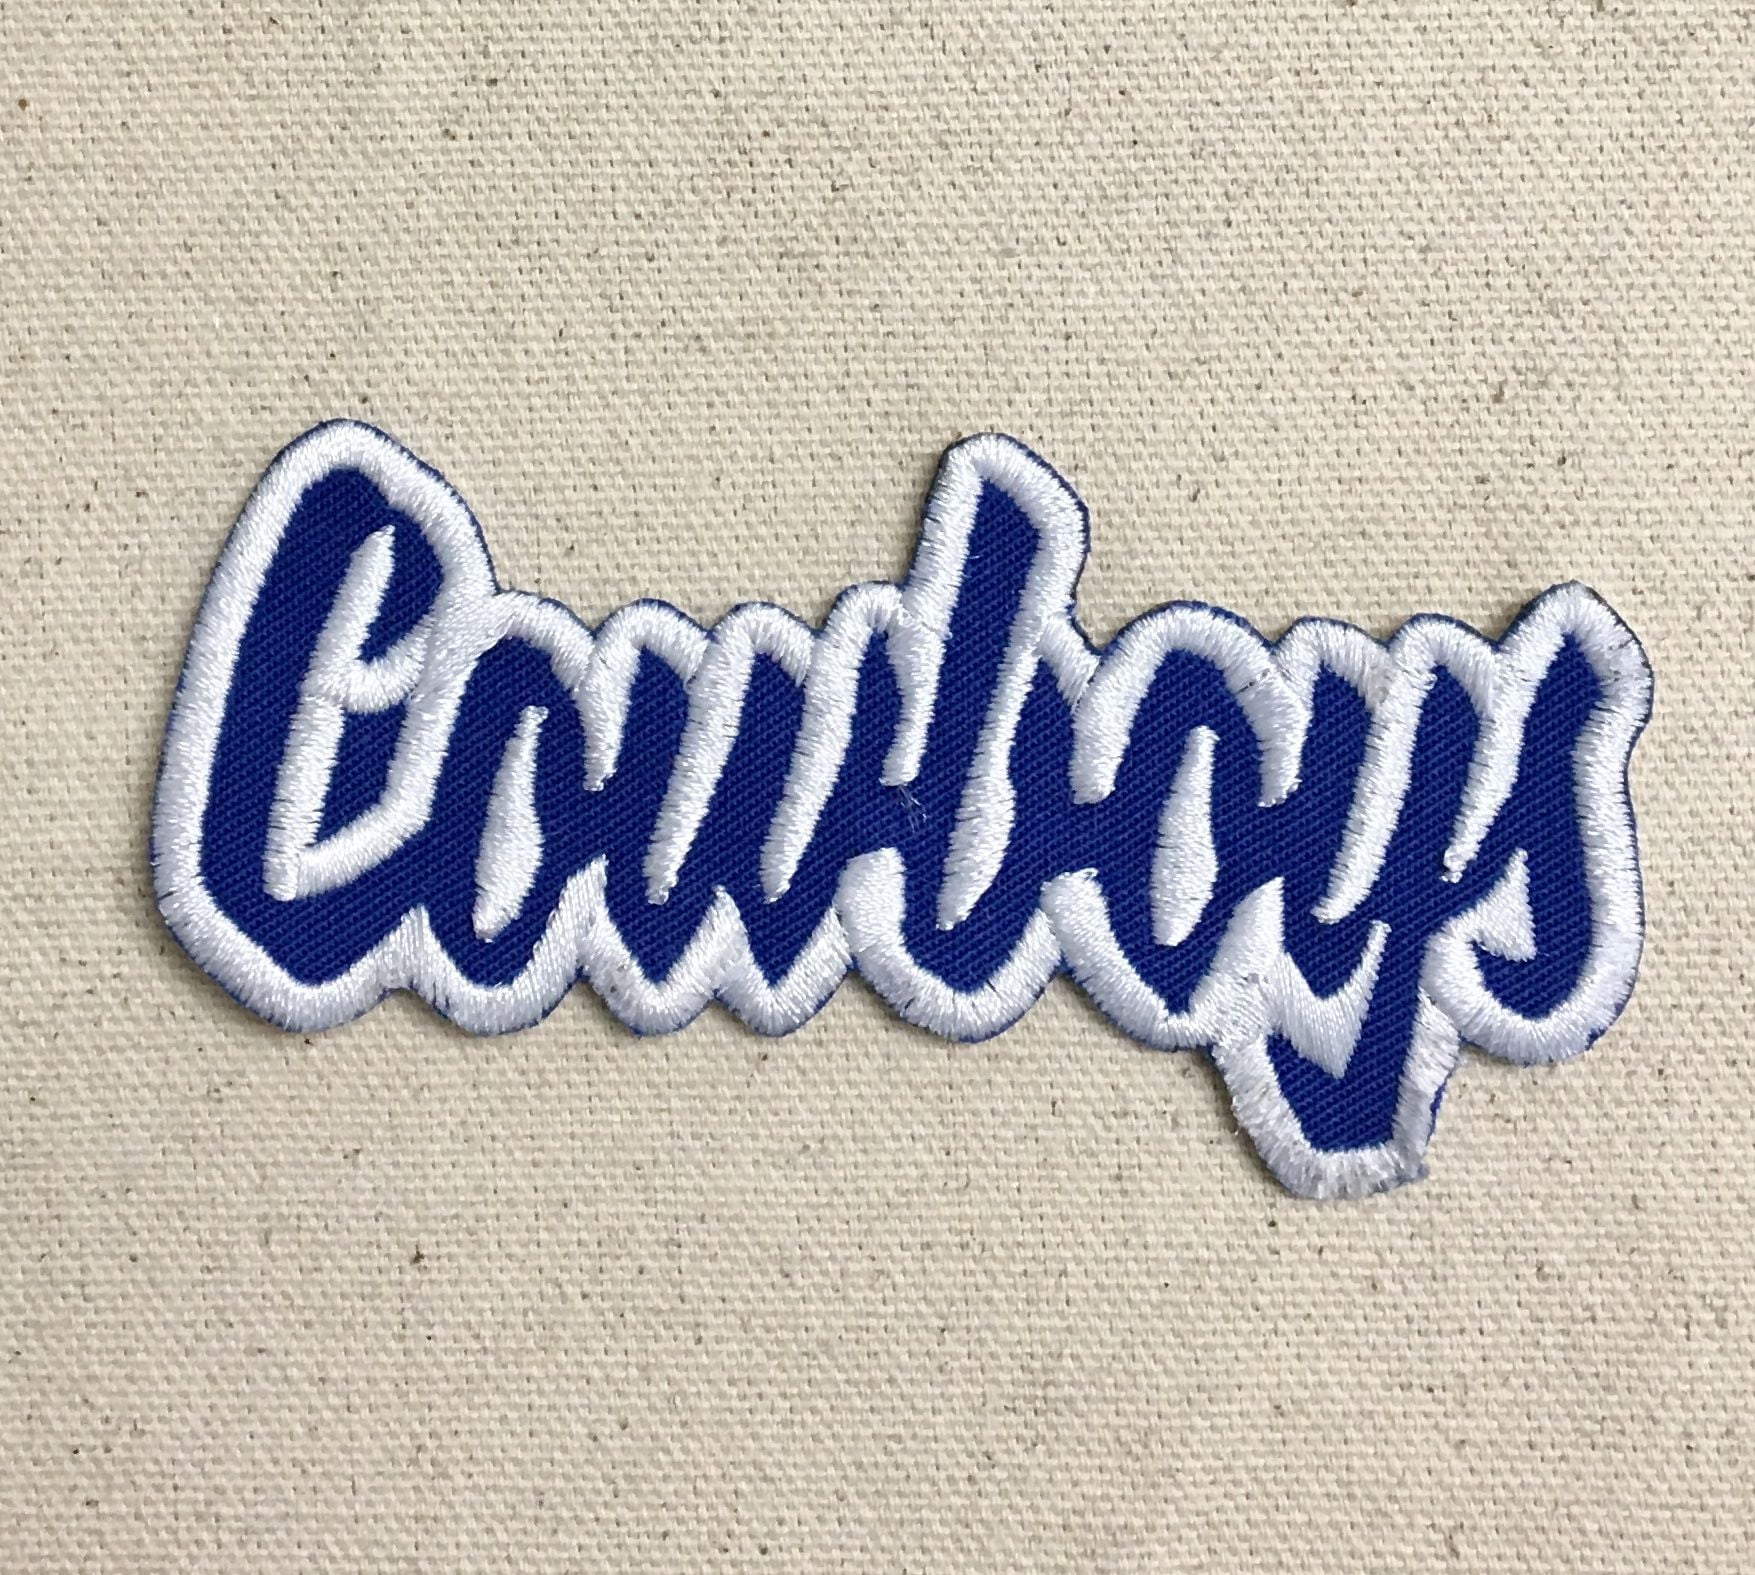 Cowboys - Royal Blue/White - Team Mascot - Words/Names - Iron on Applique/Embroidered  Patch 